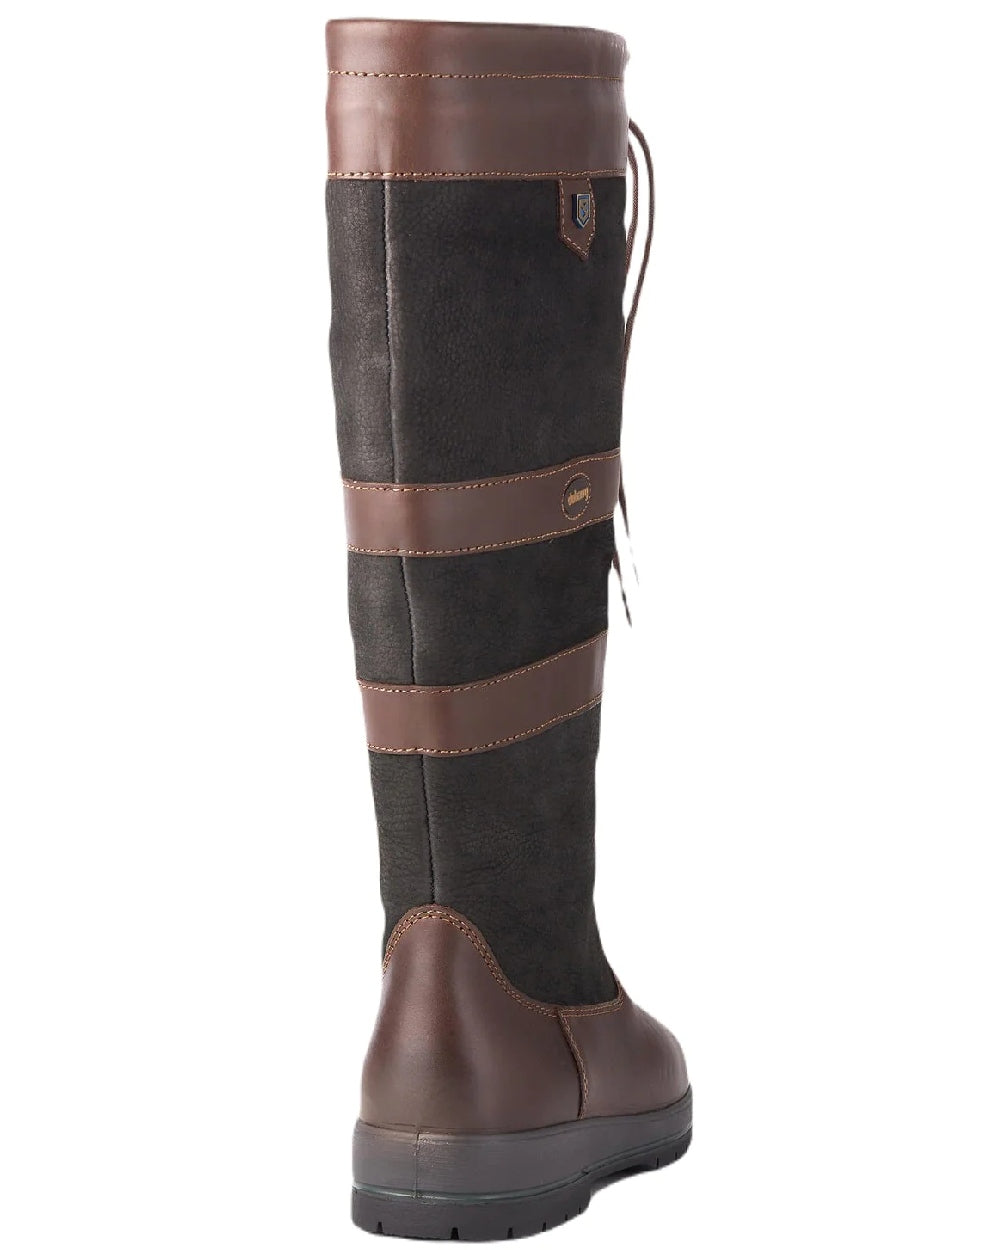 Dubarry Galway Country Boots in Black Brown 